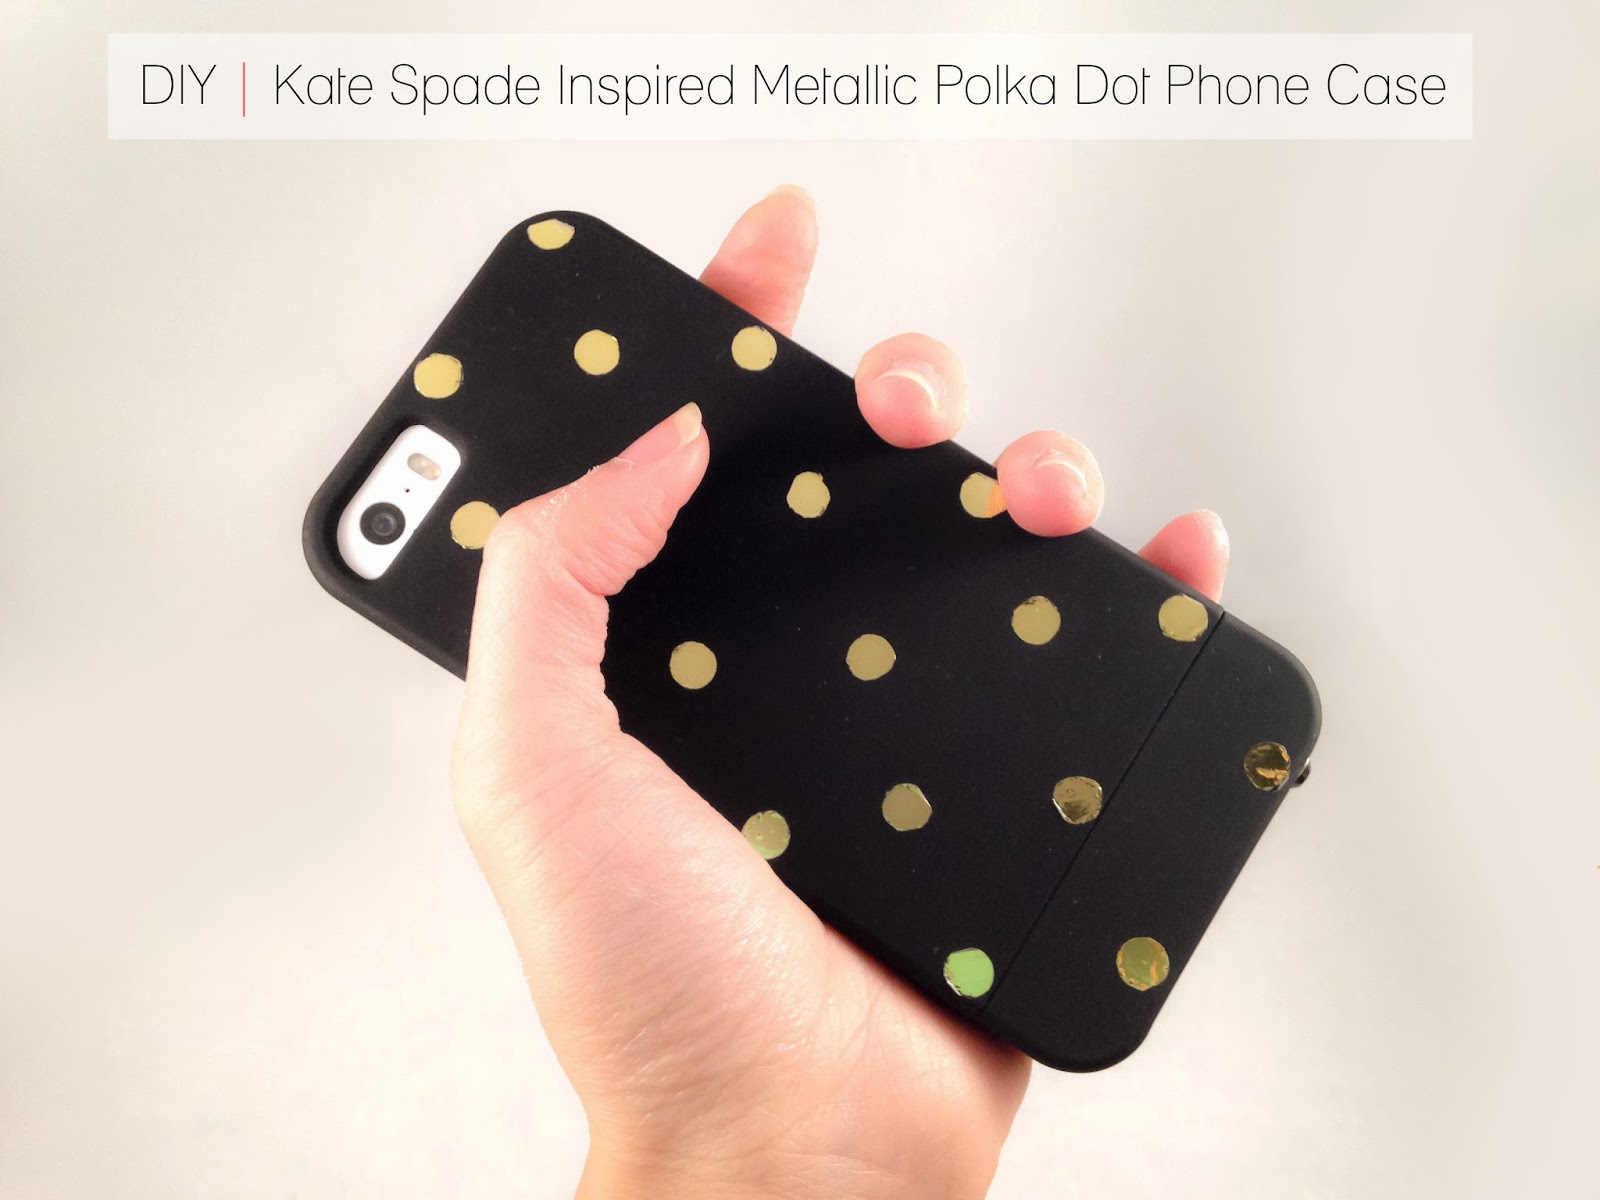 50 Crafts To Make and Sell - Easy DIY Ideas for Cheap Things To Sell on Etsy, Online and for Craft Fairs. Make Money with These Homemade Crafts for Teens, Kids, Christmas, Summer, Mother’s Day Gifts. | DIY Kate Spade Inspired Metallic Polka Dot Phone Case #crafts #diy